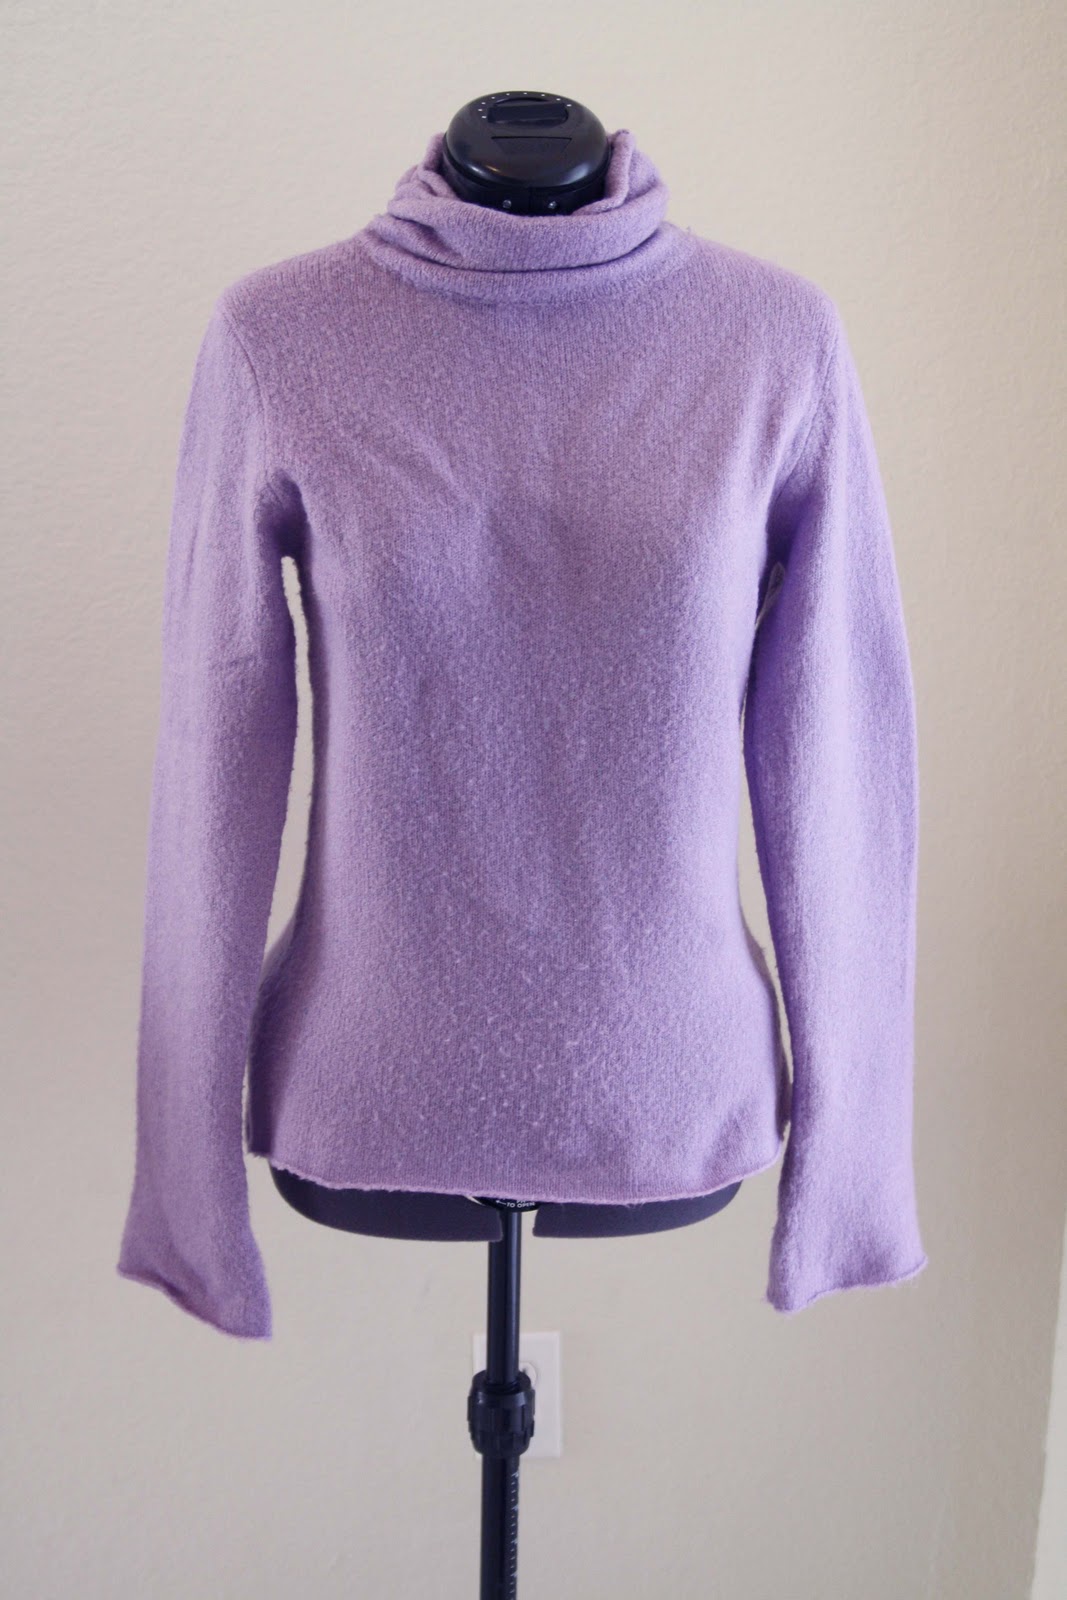 ReInventions - Violet Flowers Sweater - Melly Sews